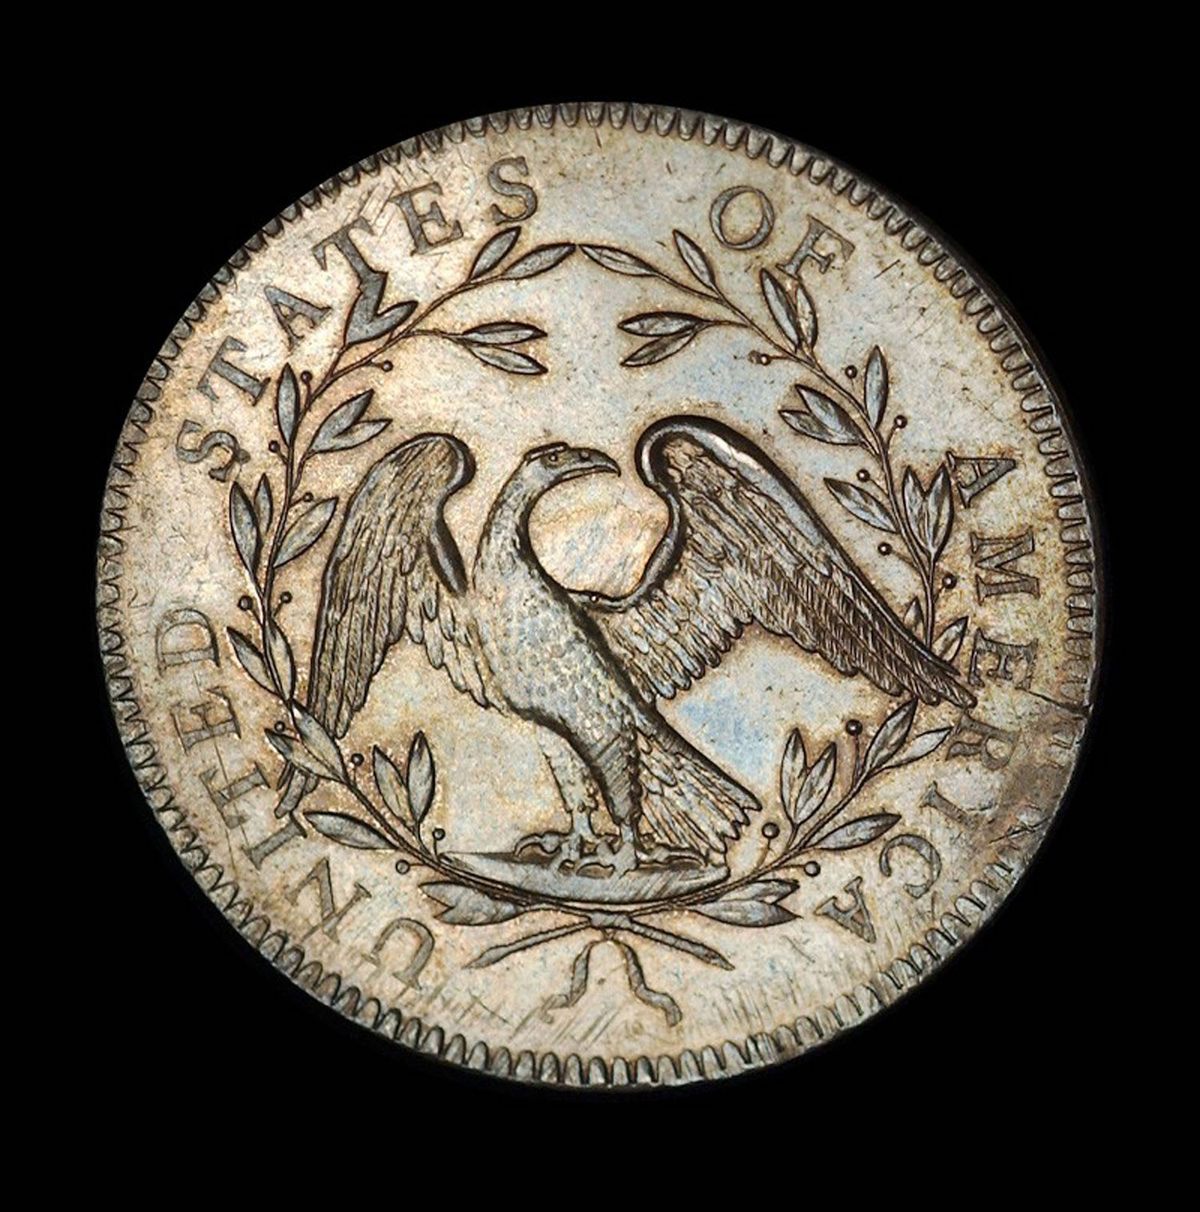 The backs of 1794 dollar coins show a narrow-necked eagle with a furrowed brow.